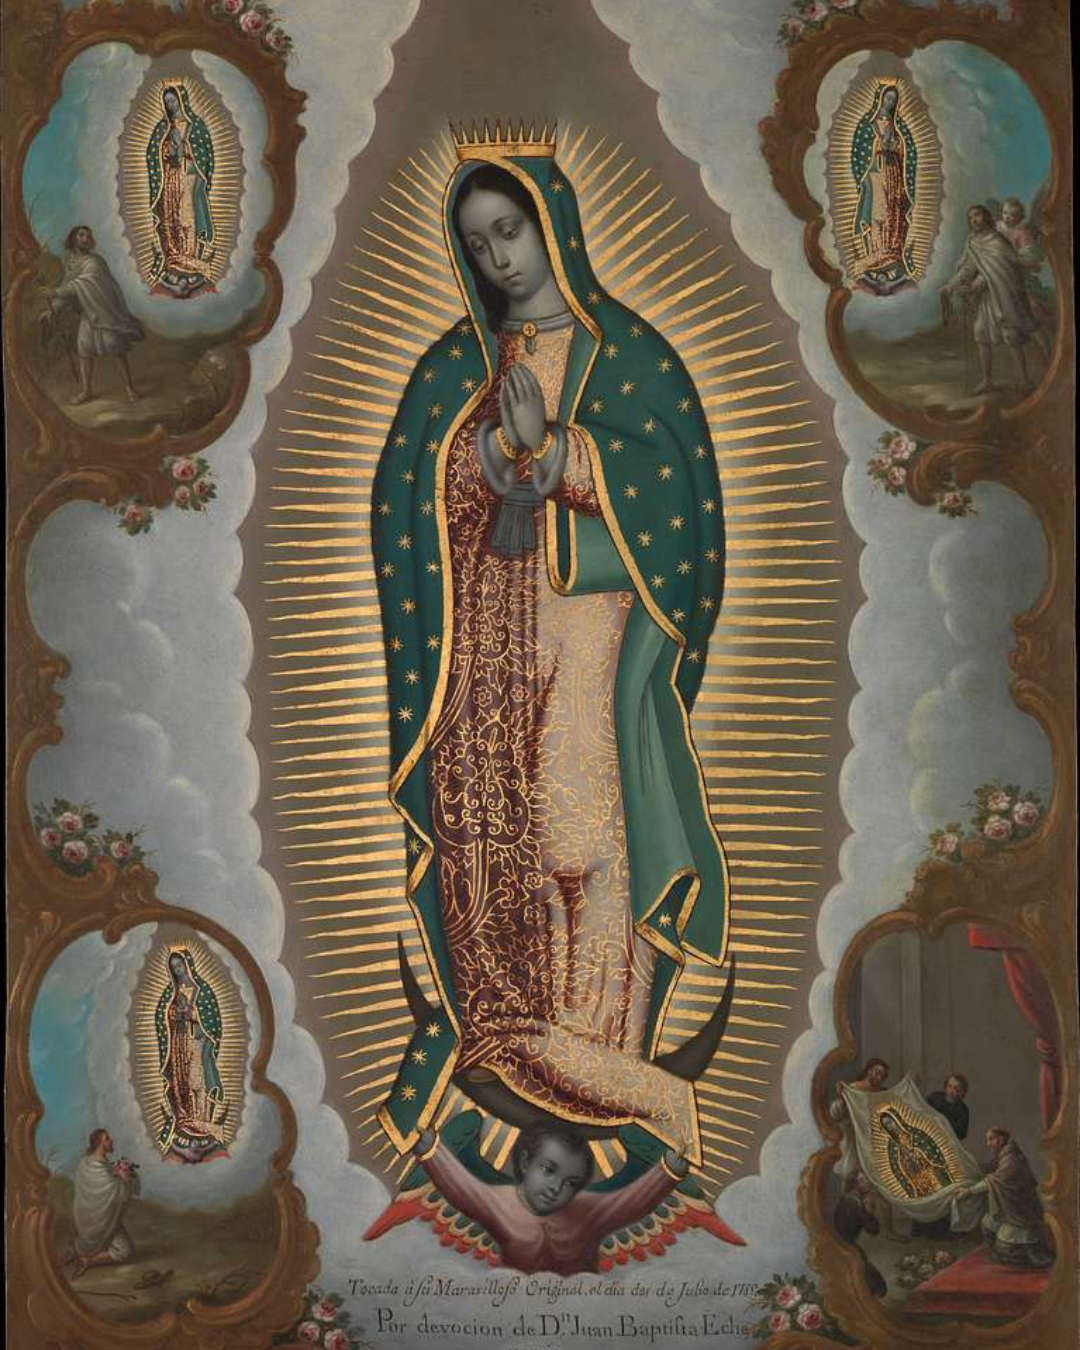 Our Lady of Guadalupe Image, guadalupe our lady, guadalupe virgin, our lady of guadalupe, juan diego saint